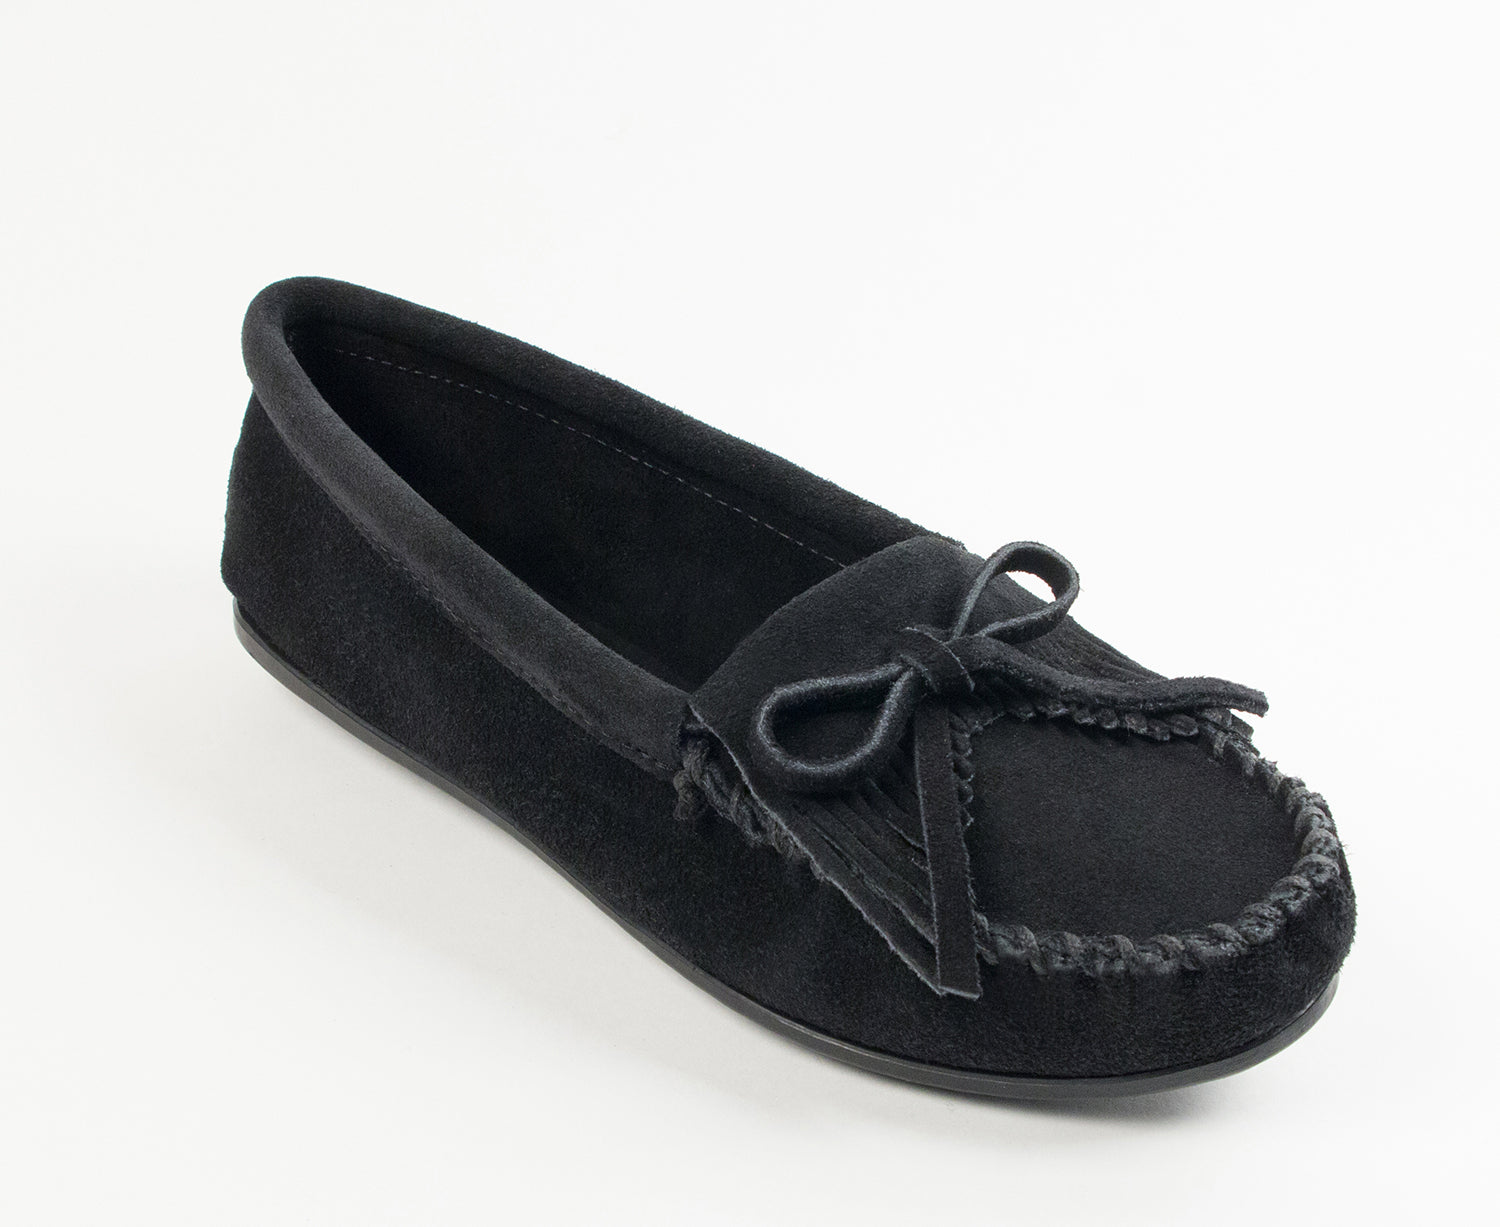 Kilty Hardsole Moccasin in Black from 3/4 Angle View